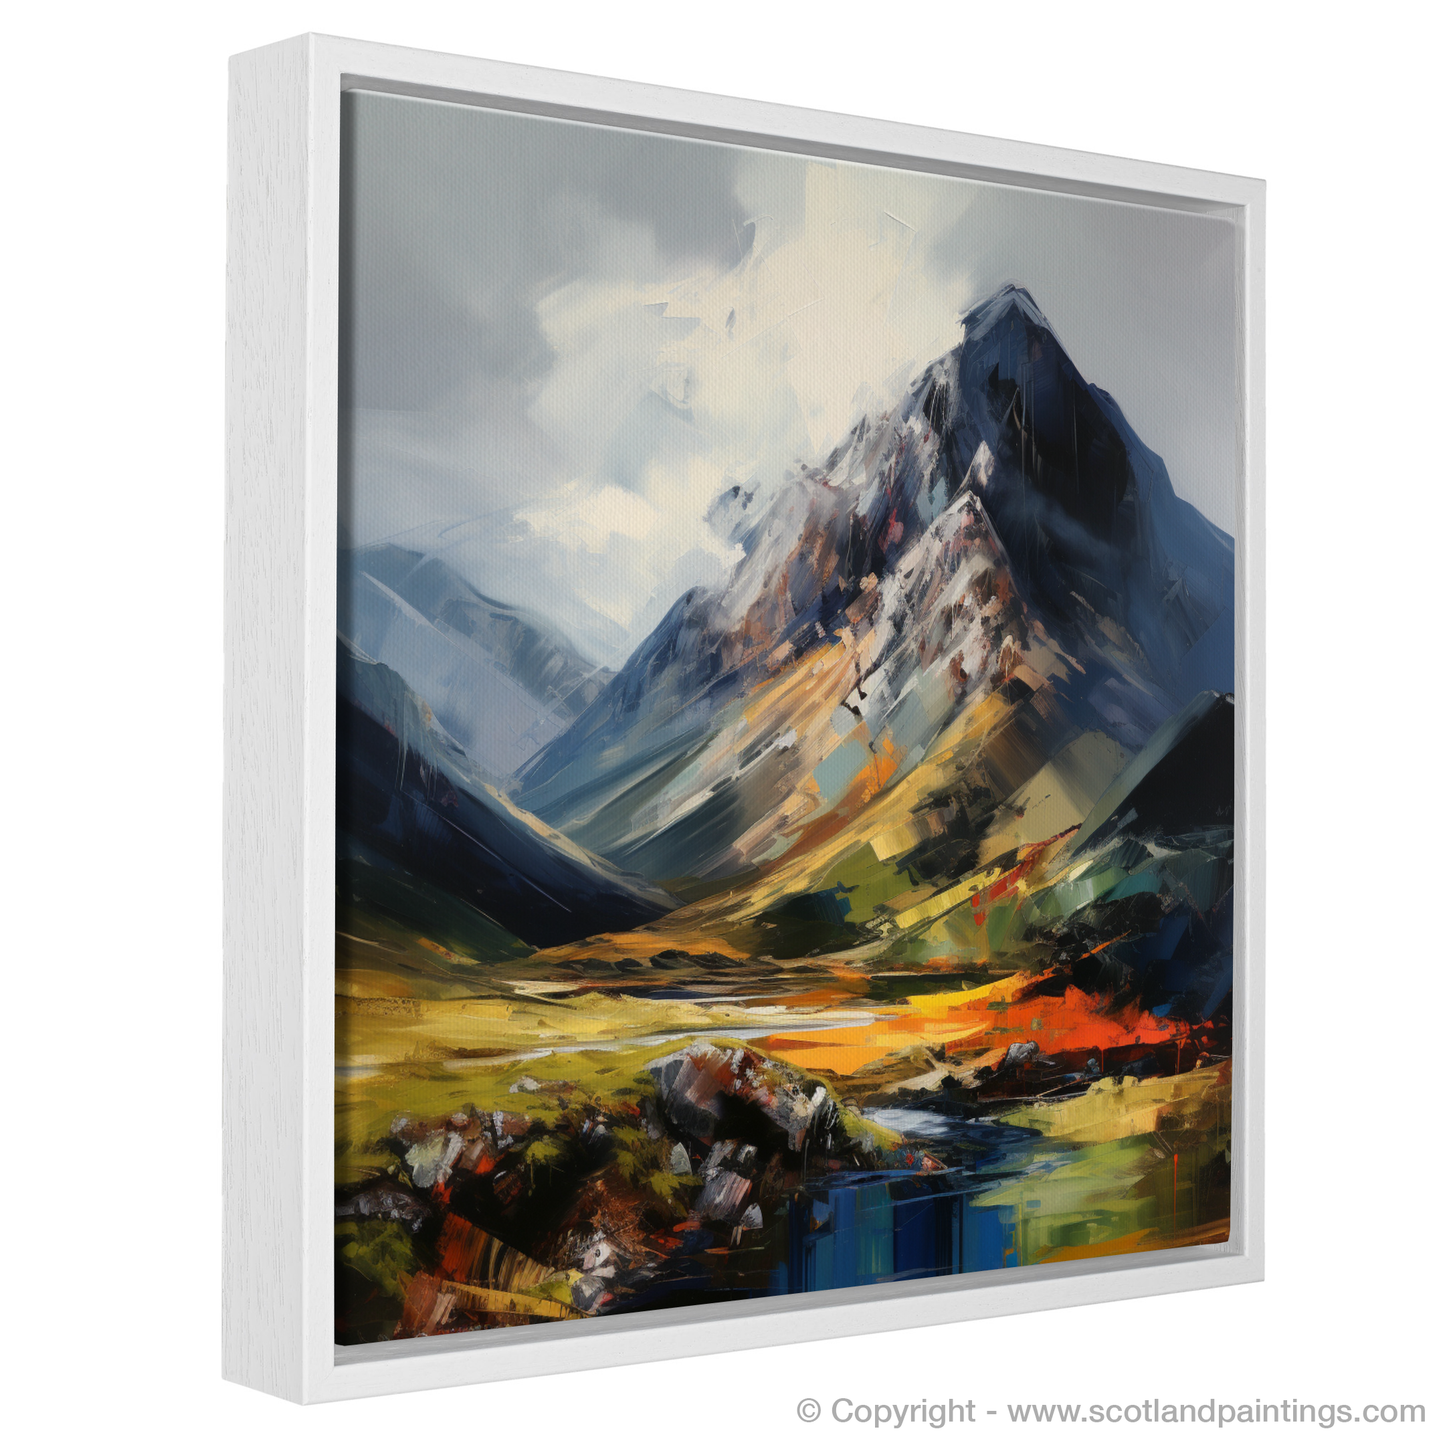 Painting and Art Print of Sgurr a' Mhaim, Highlands. entitled "Highland Majesty: An Expressionist Ode to Sgurr a' Mhaim".